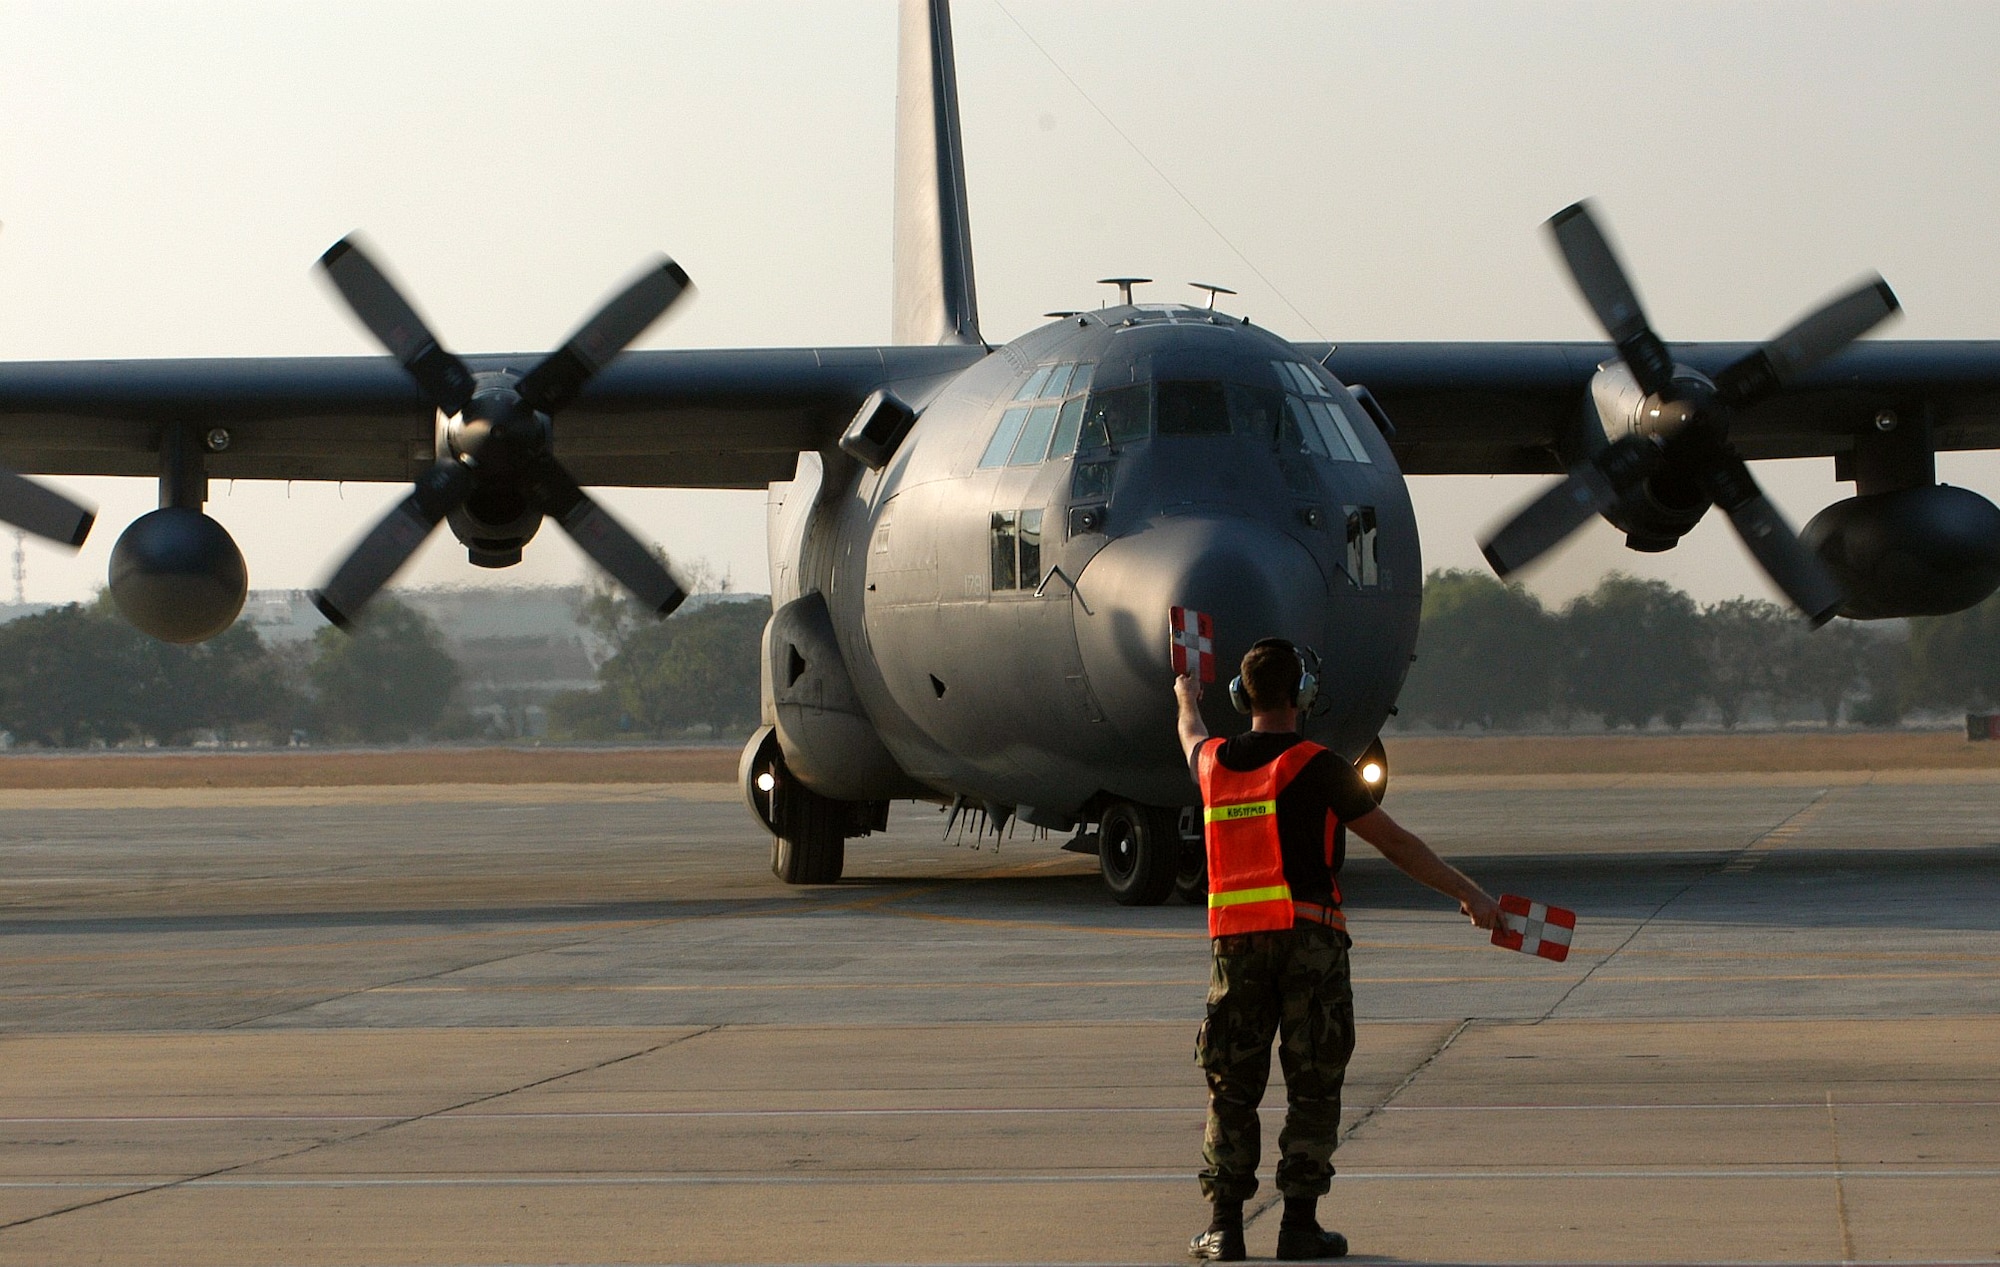 BANGKOK, Thailand -- An Airman here launches an MC-130 to Phuket, Thailand, on Jan. 1.  The plane was loaded with five pallets of blankets and medical supplies.  He and 100 others from the 353rd Special Operations Group are flying supplies to the tsunami-hit areas of southern Thailand. The 353rd SOG is assigned to Kadena Air Base, Japan. (U.S. Air Force photo by Master Sgt. Michael Farris) 